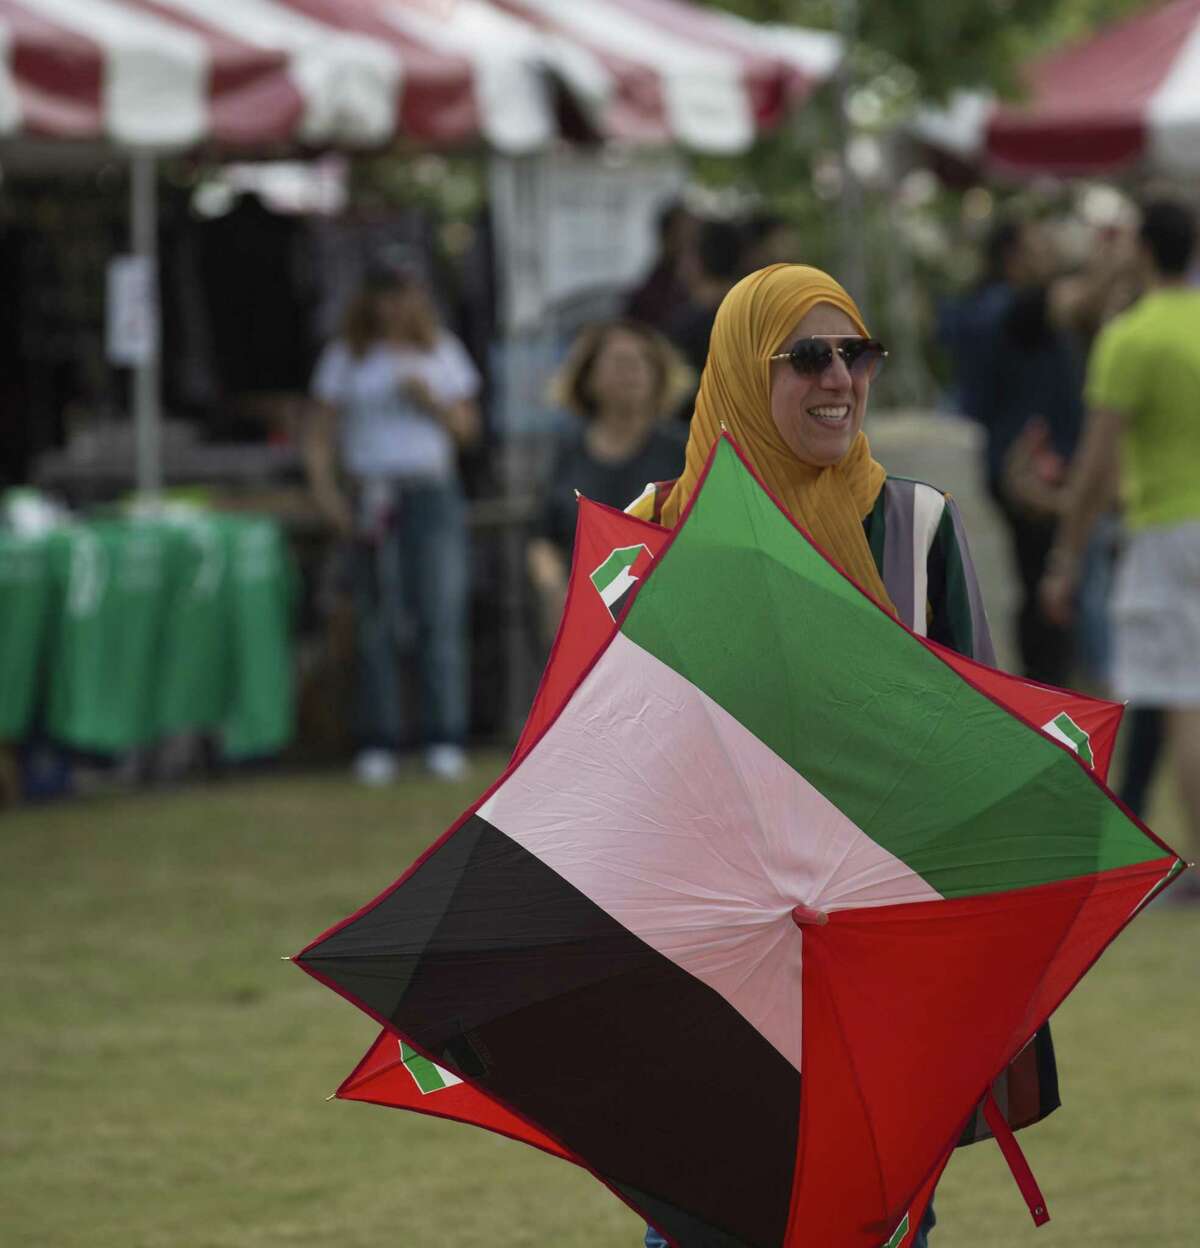 Houston Palestinian Festival shares culture, heritage through food and